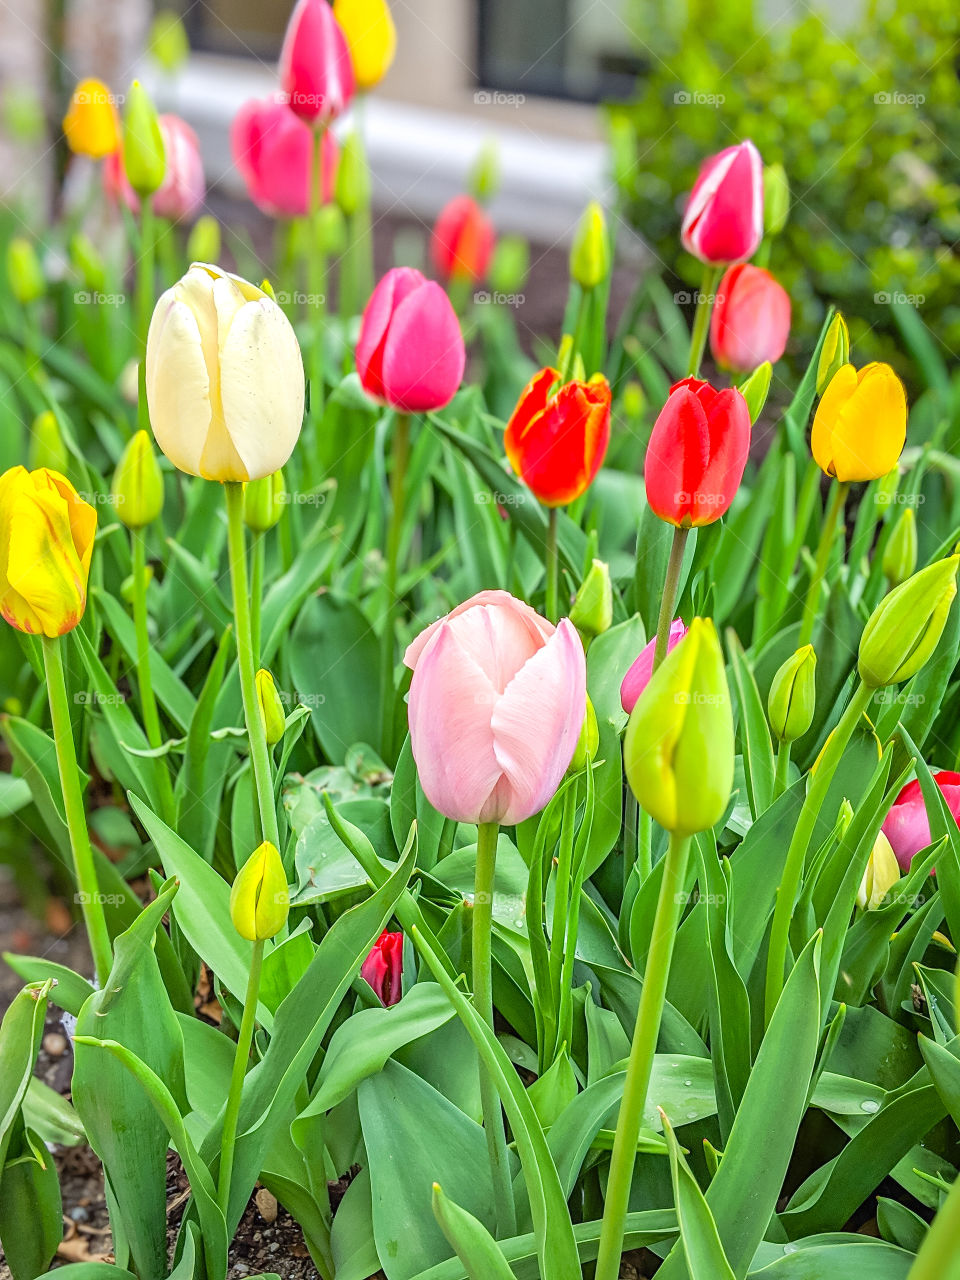 Vibrant, Bright, and Colorful Tulips